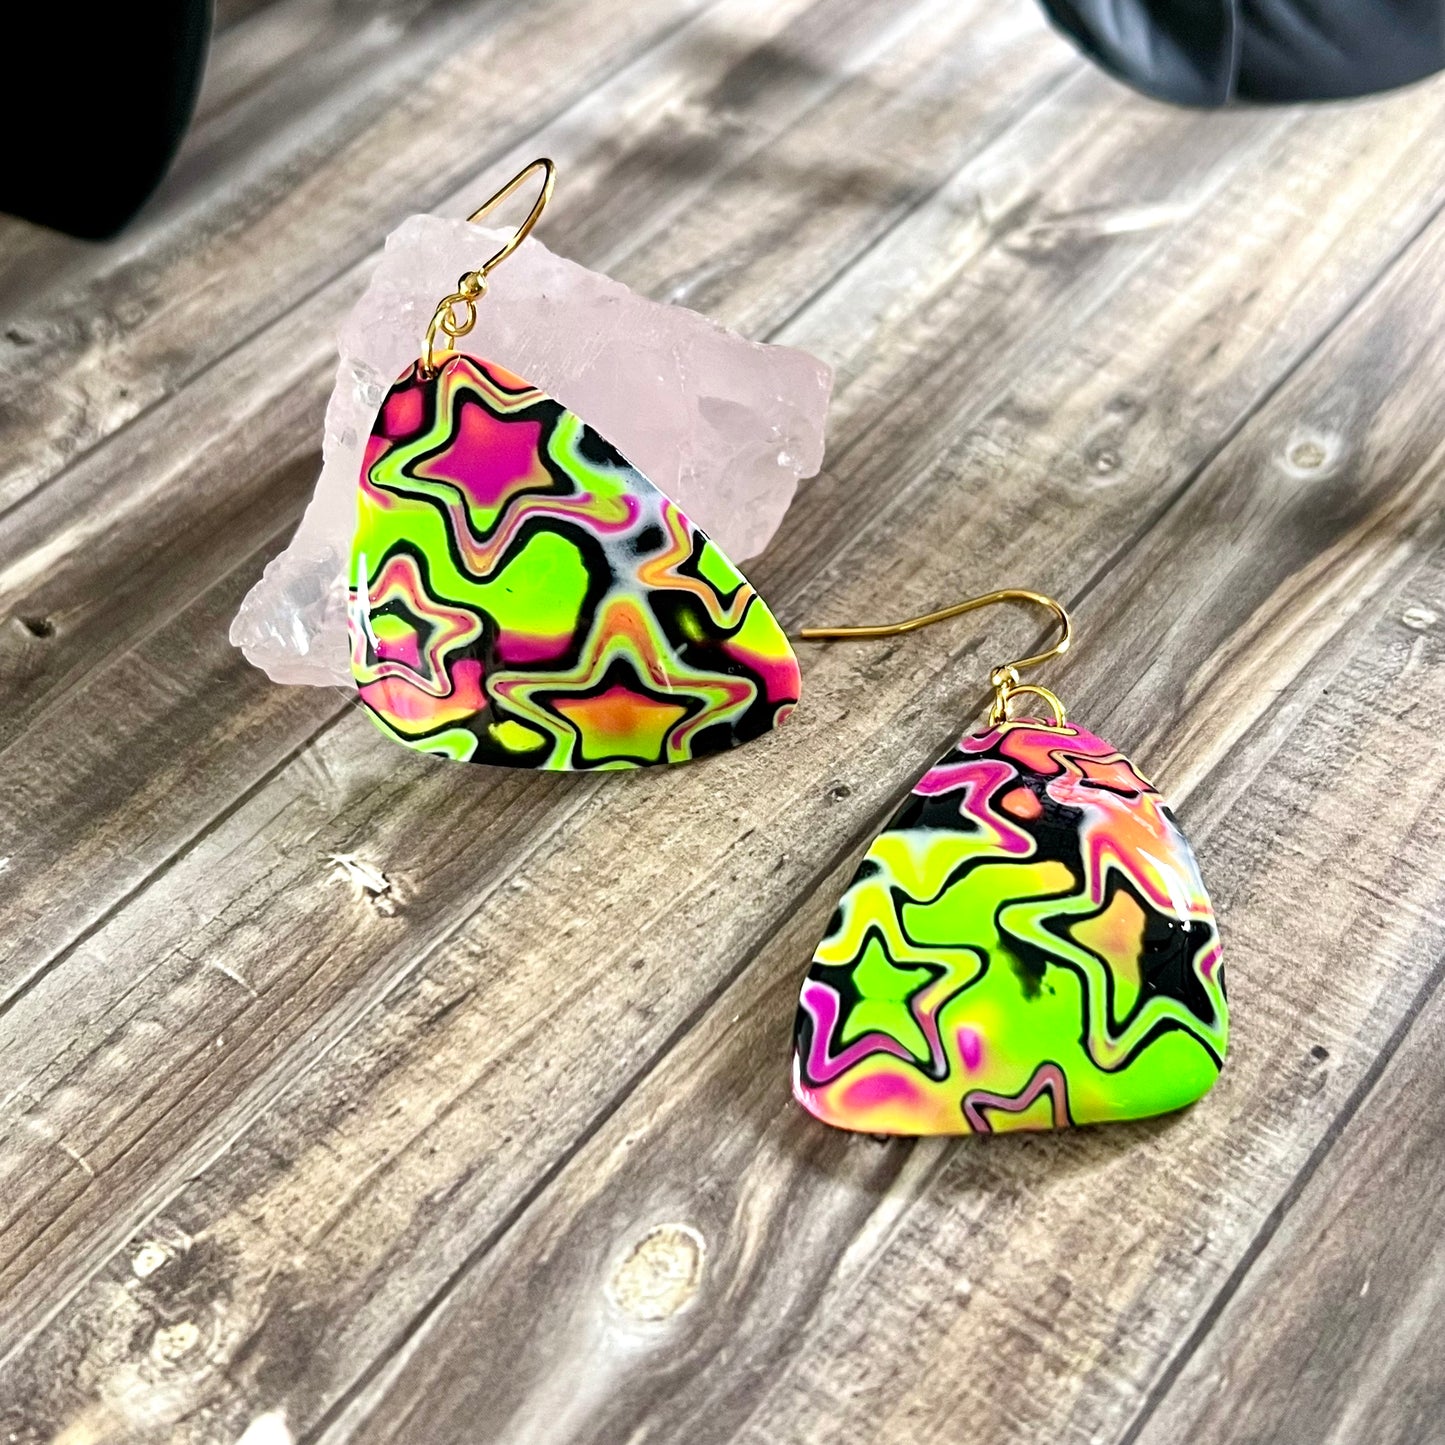 Large domed triangles, psychedelic stars, green yellow orange pink, handmade earrings